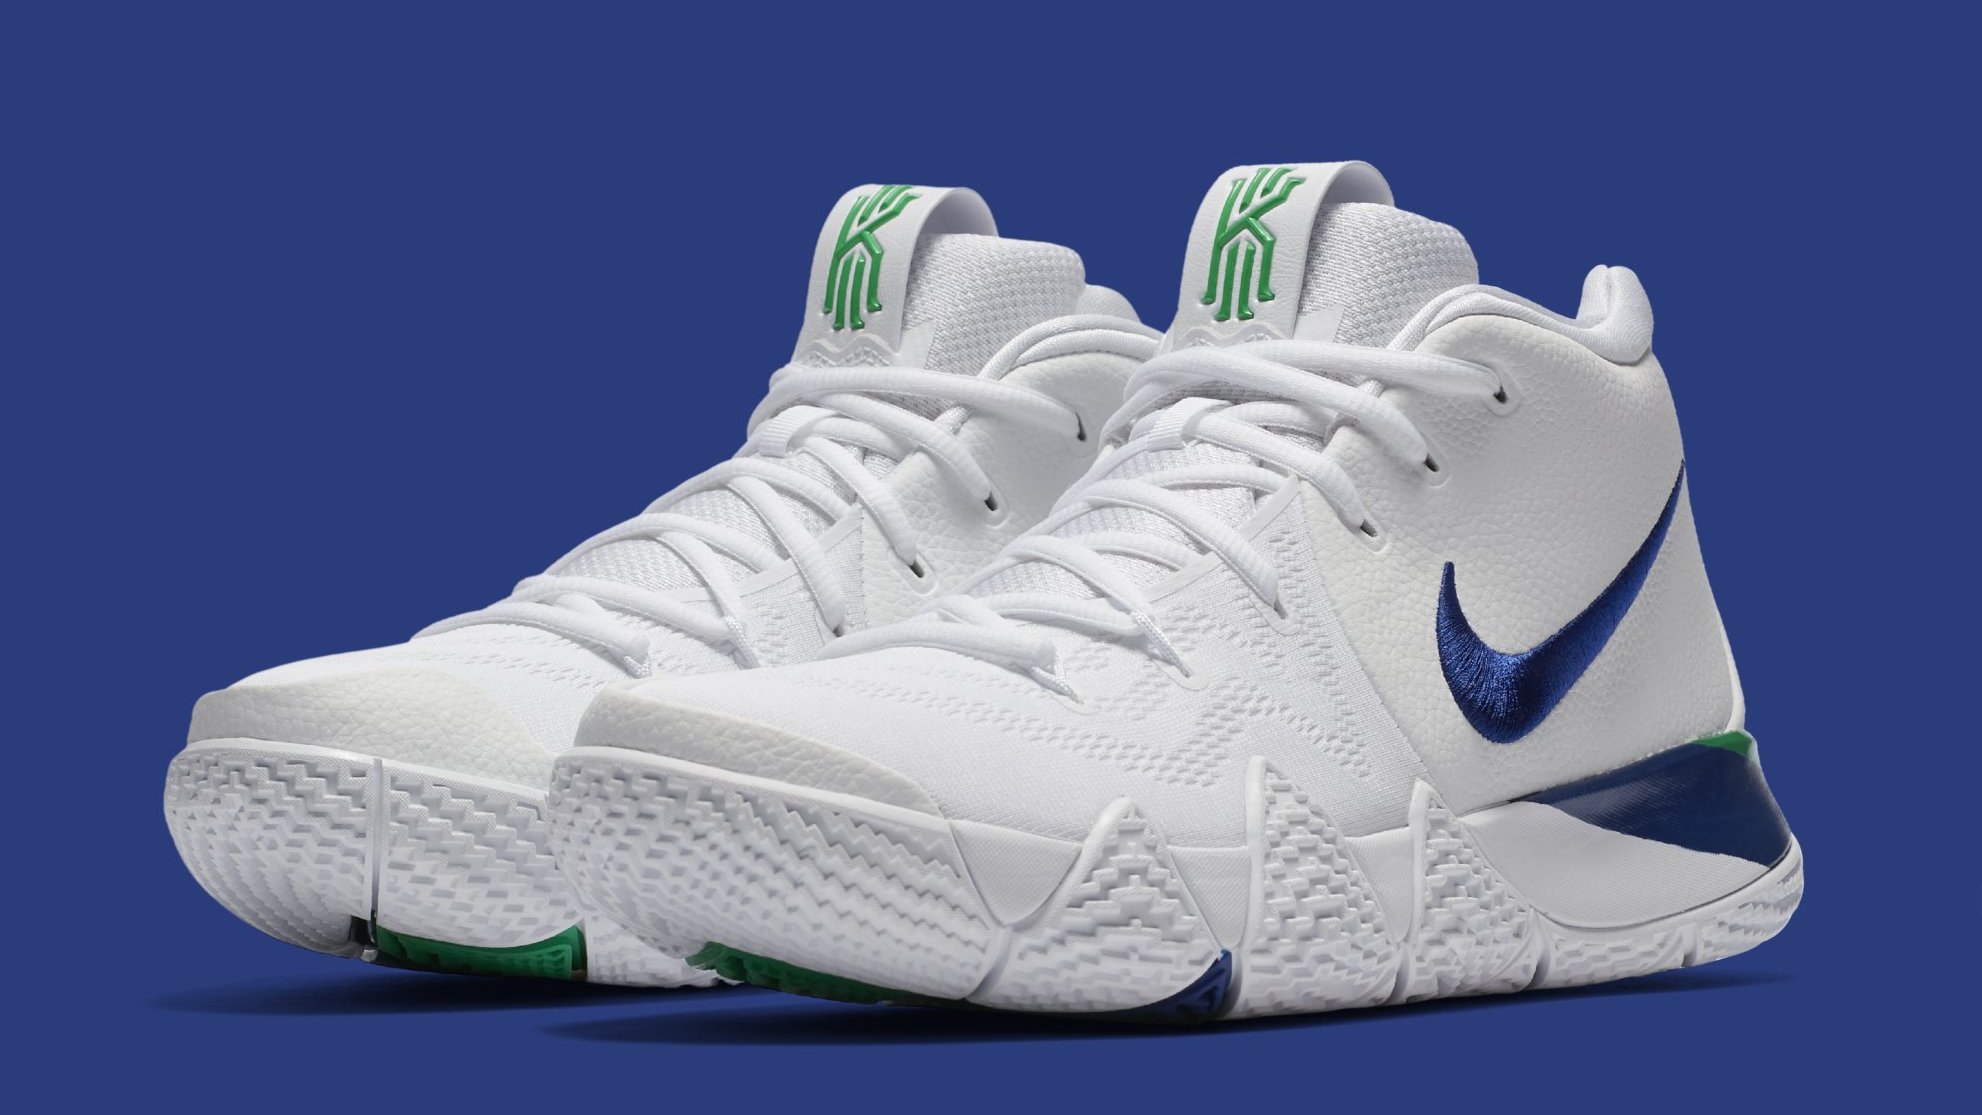 white and green kyrie 4